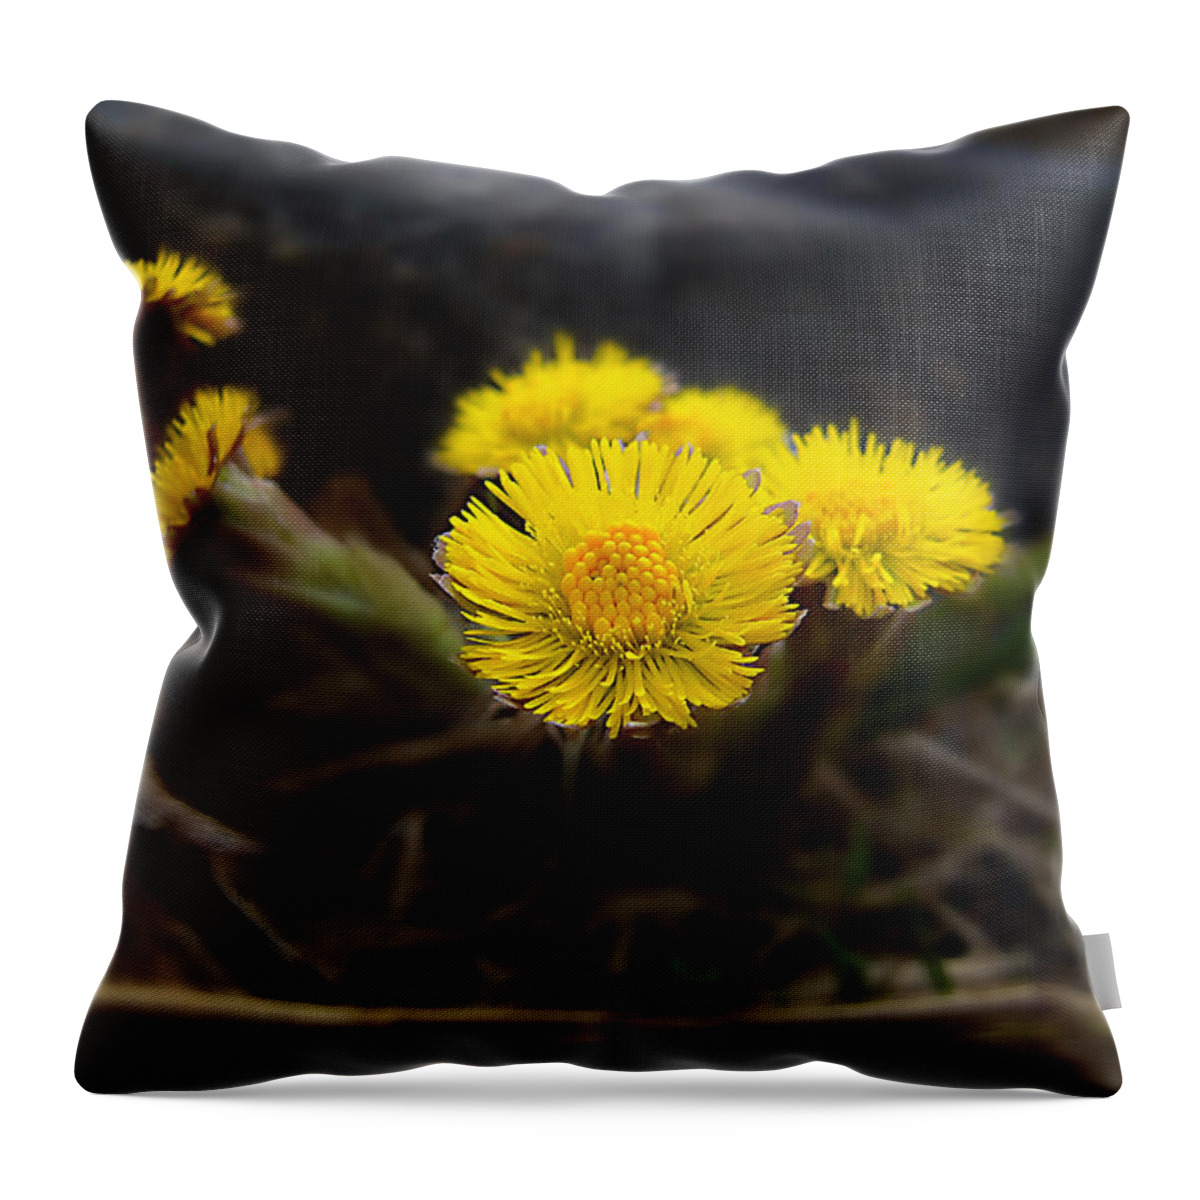 Arrangement Throw Pillow featuring the photograph Flower Weed by Svetlana Sewell